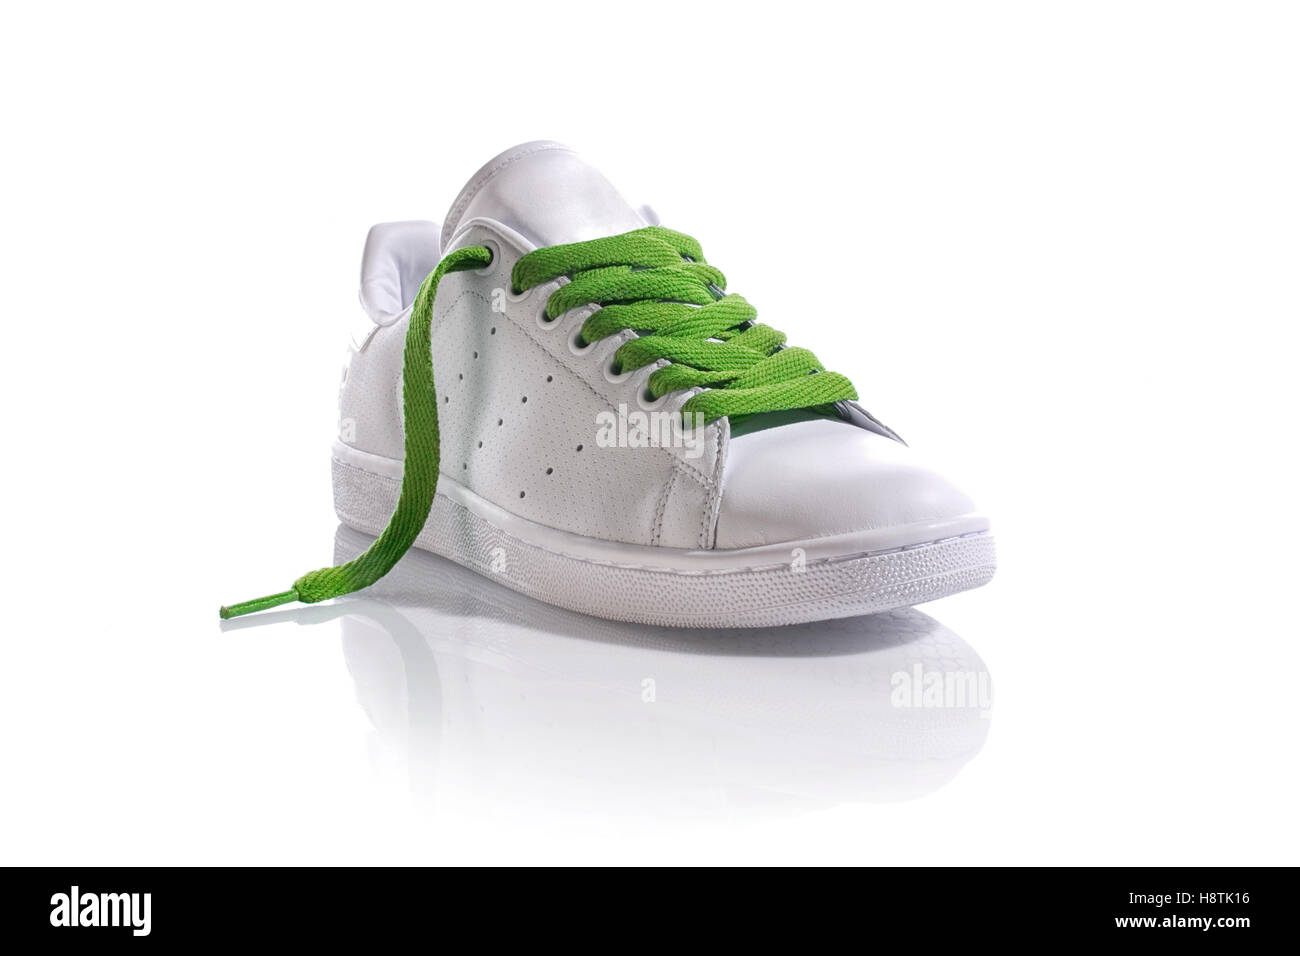 green and white tennis shoes